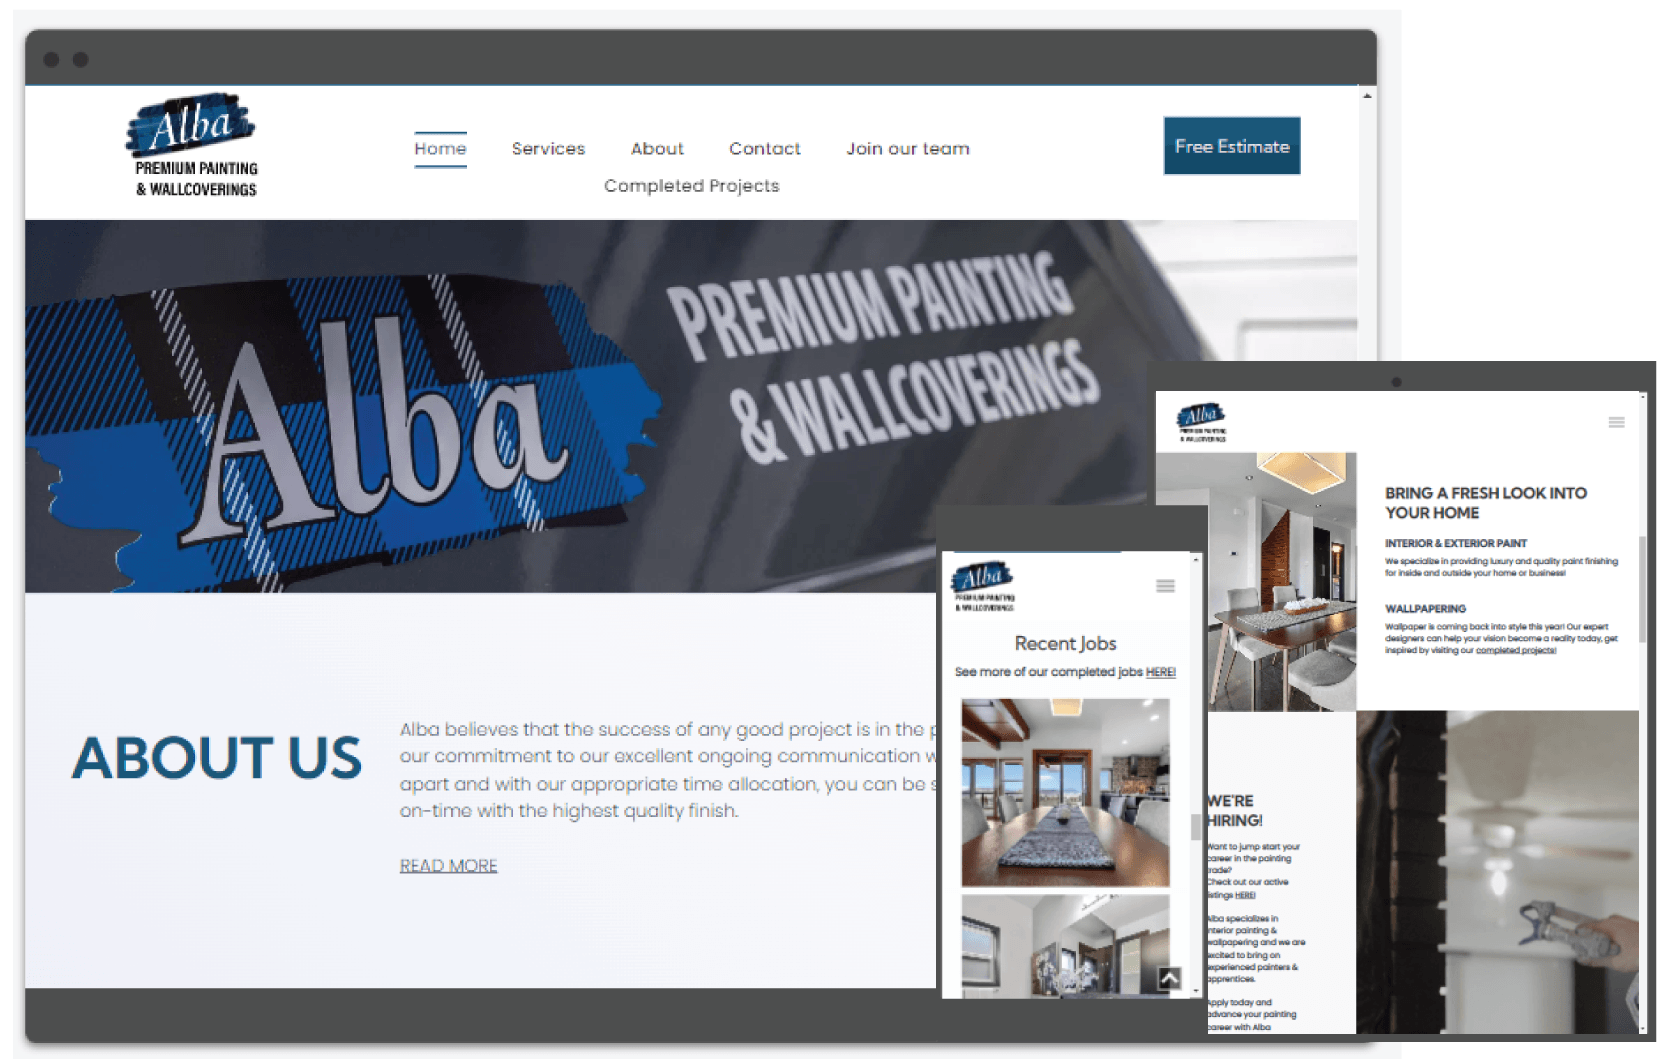 Alba premium painting website made by boop interactive